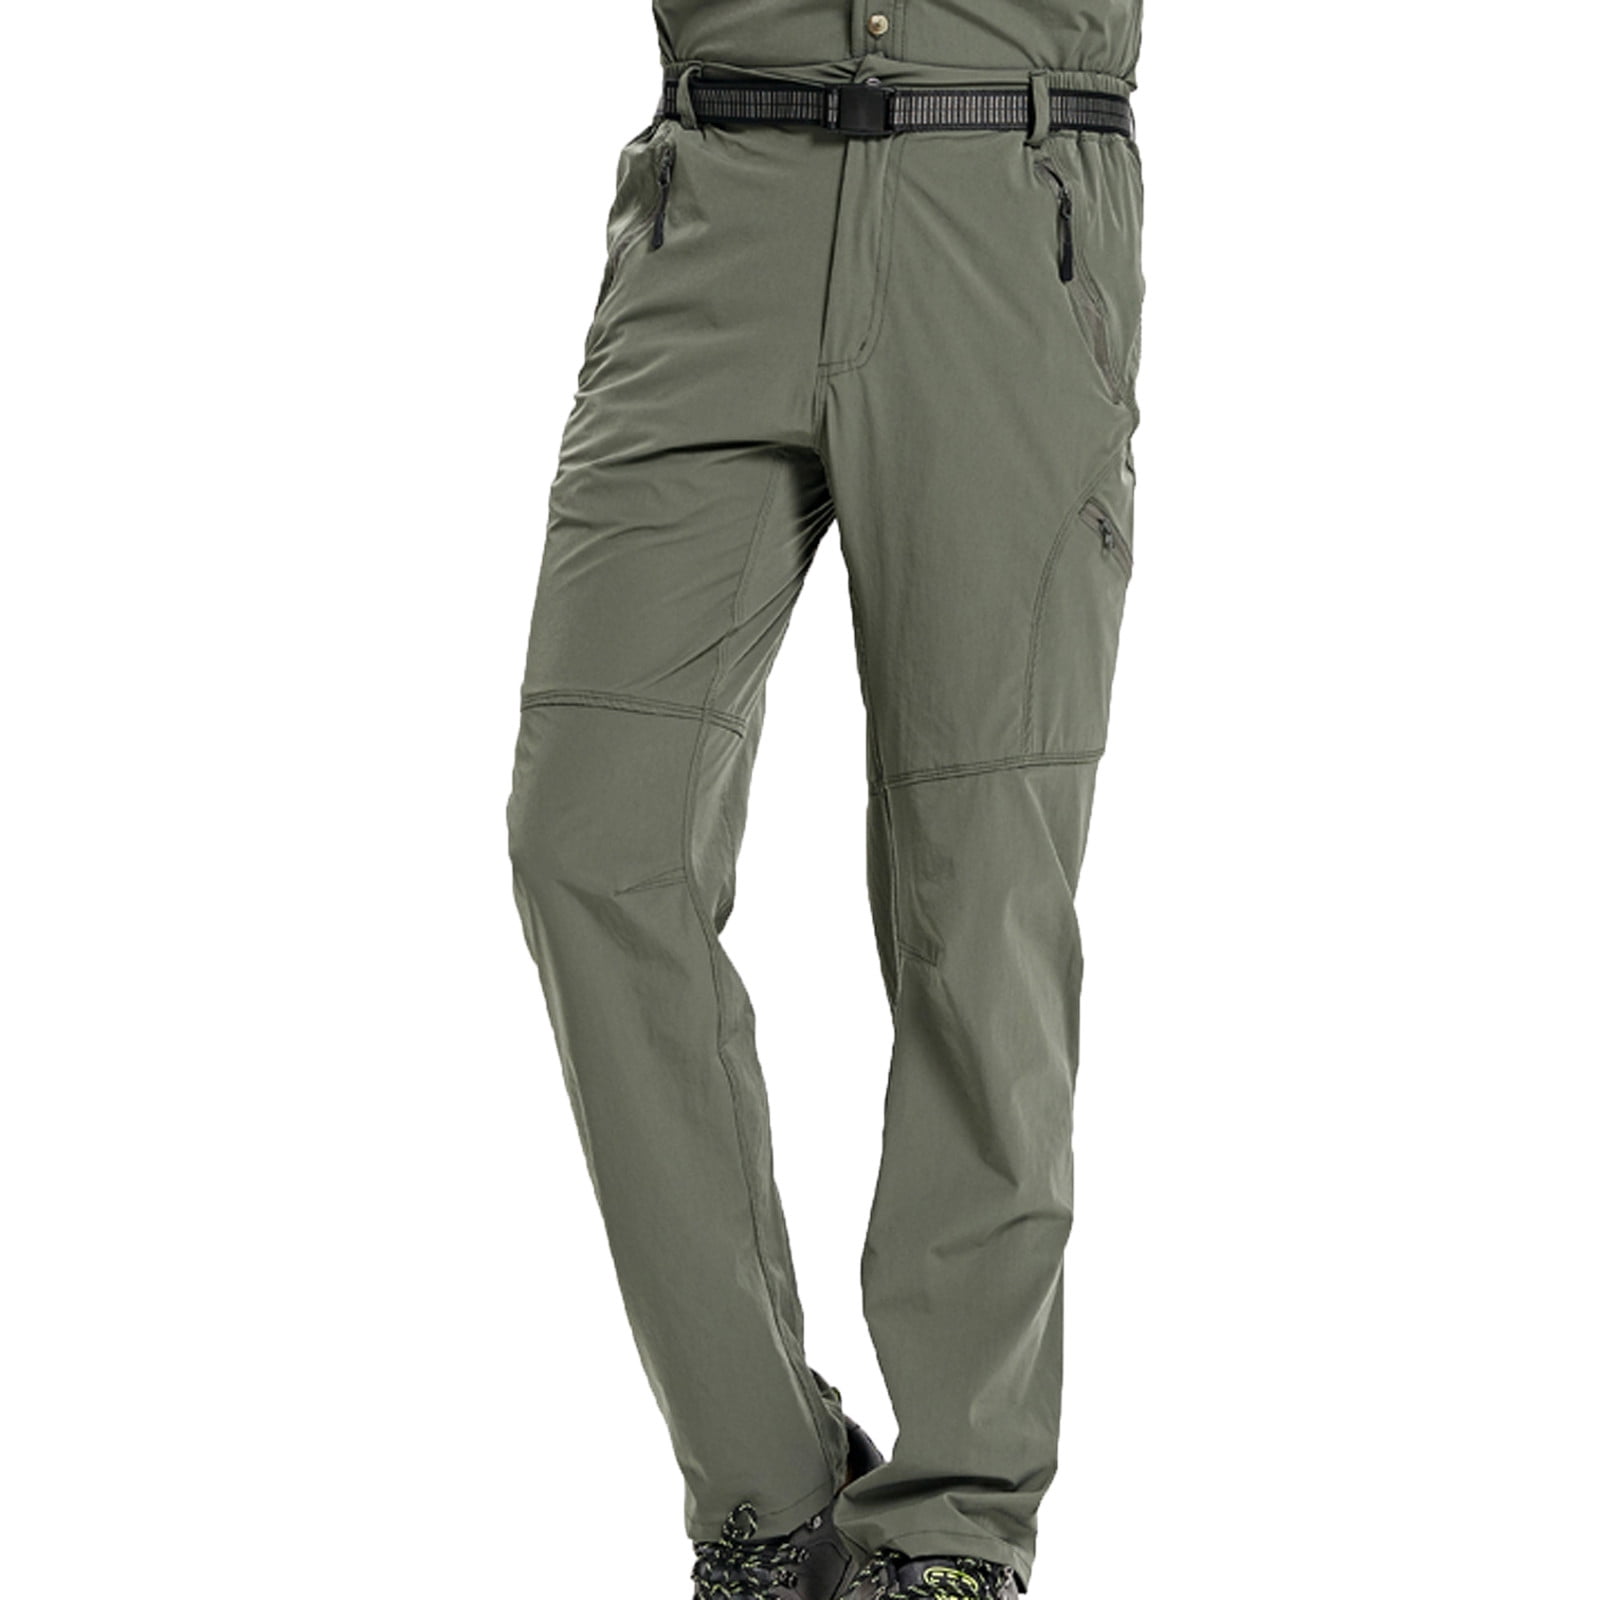 Taqqpue Men's Hiking Pants with Belt Outdoor Quick-Dry Lightweight  Waterproof Fishing Mountain Pants Tactical Pants Breathable Climbing  Camping Cargo